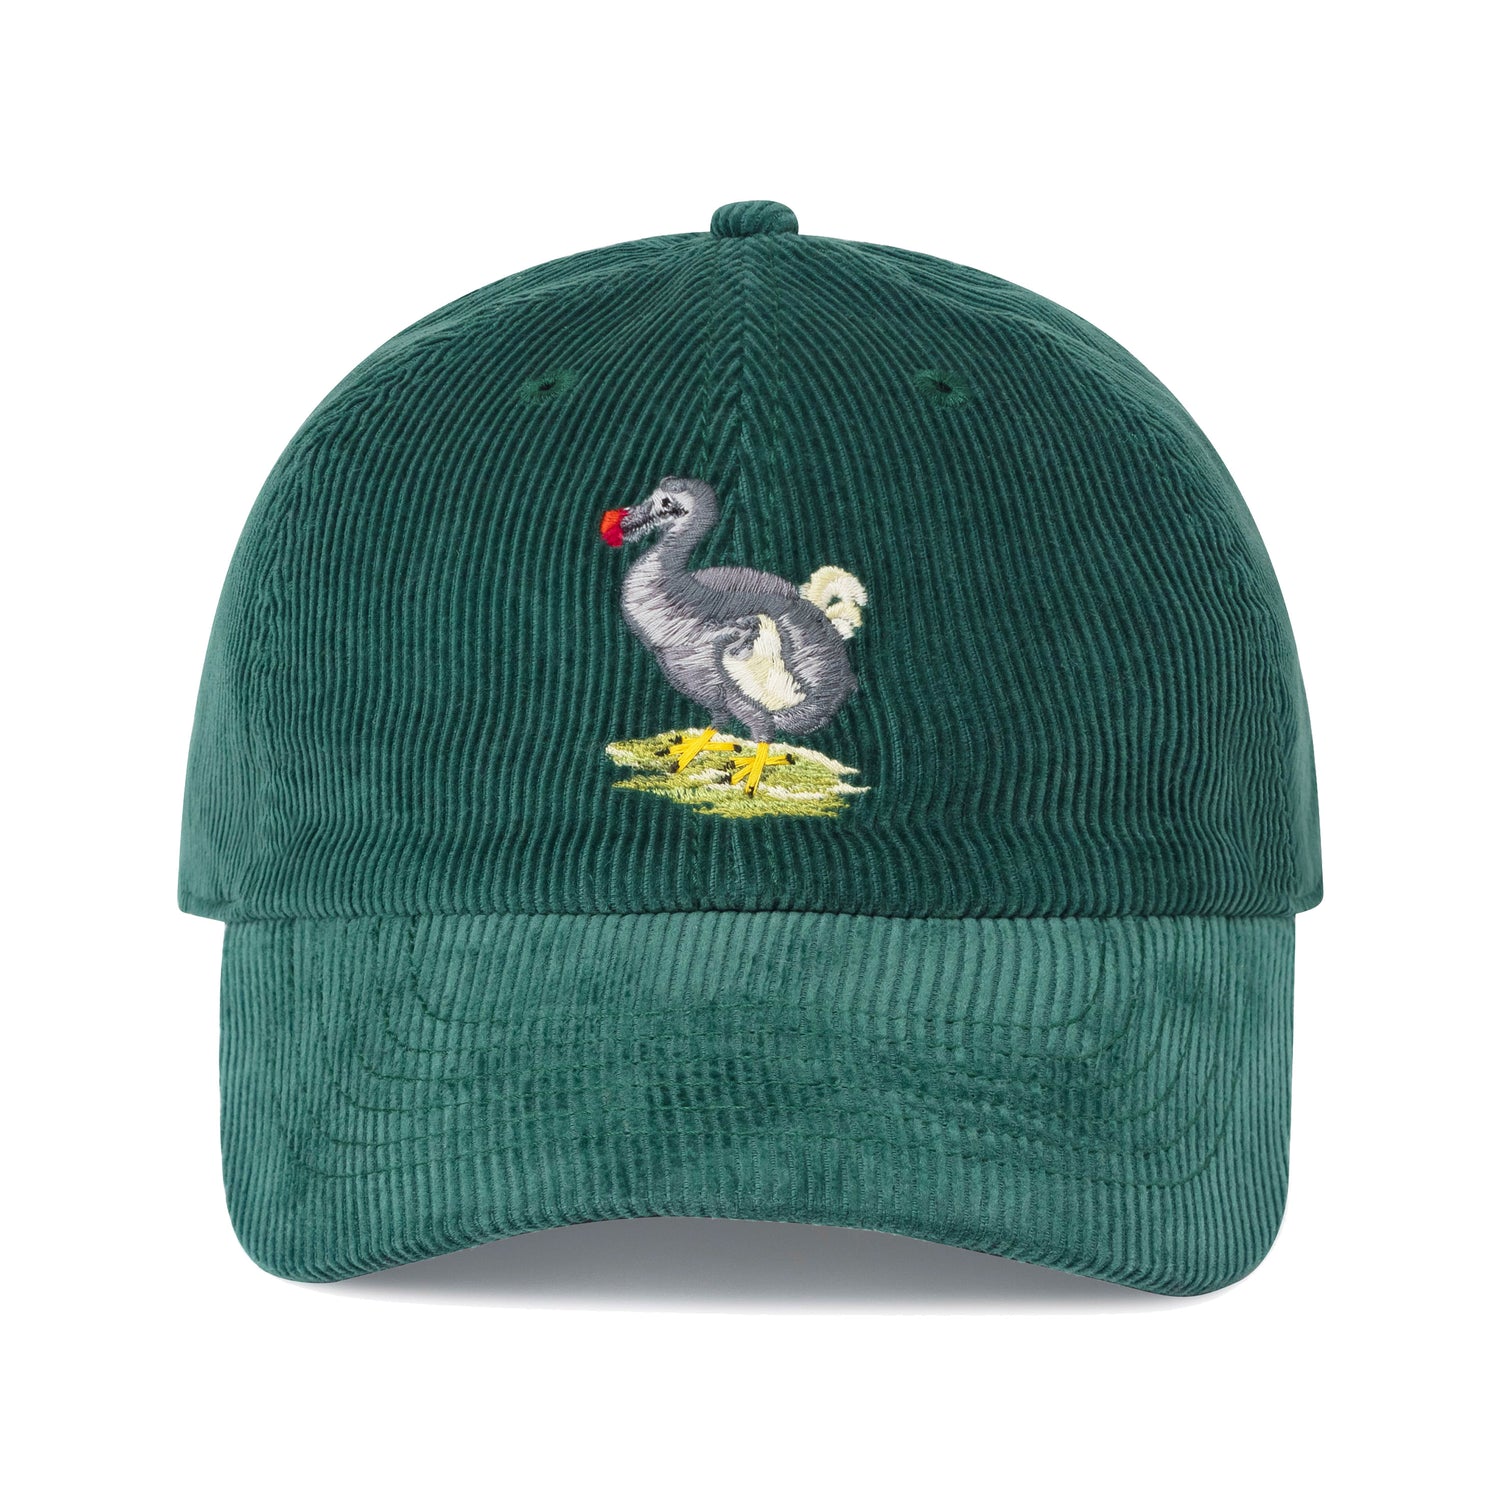 Green corduroy hat with with satin-stitched dodo bird motif.